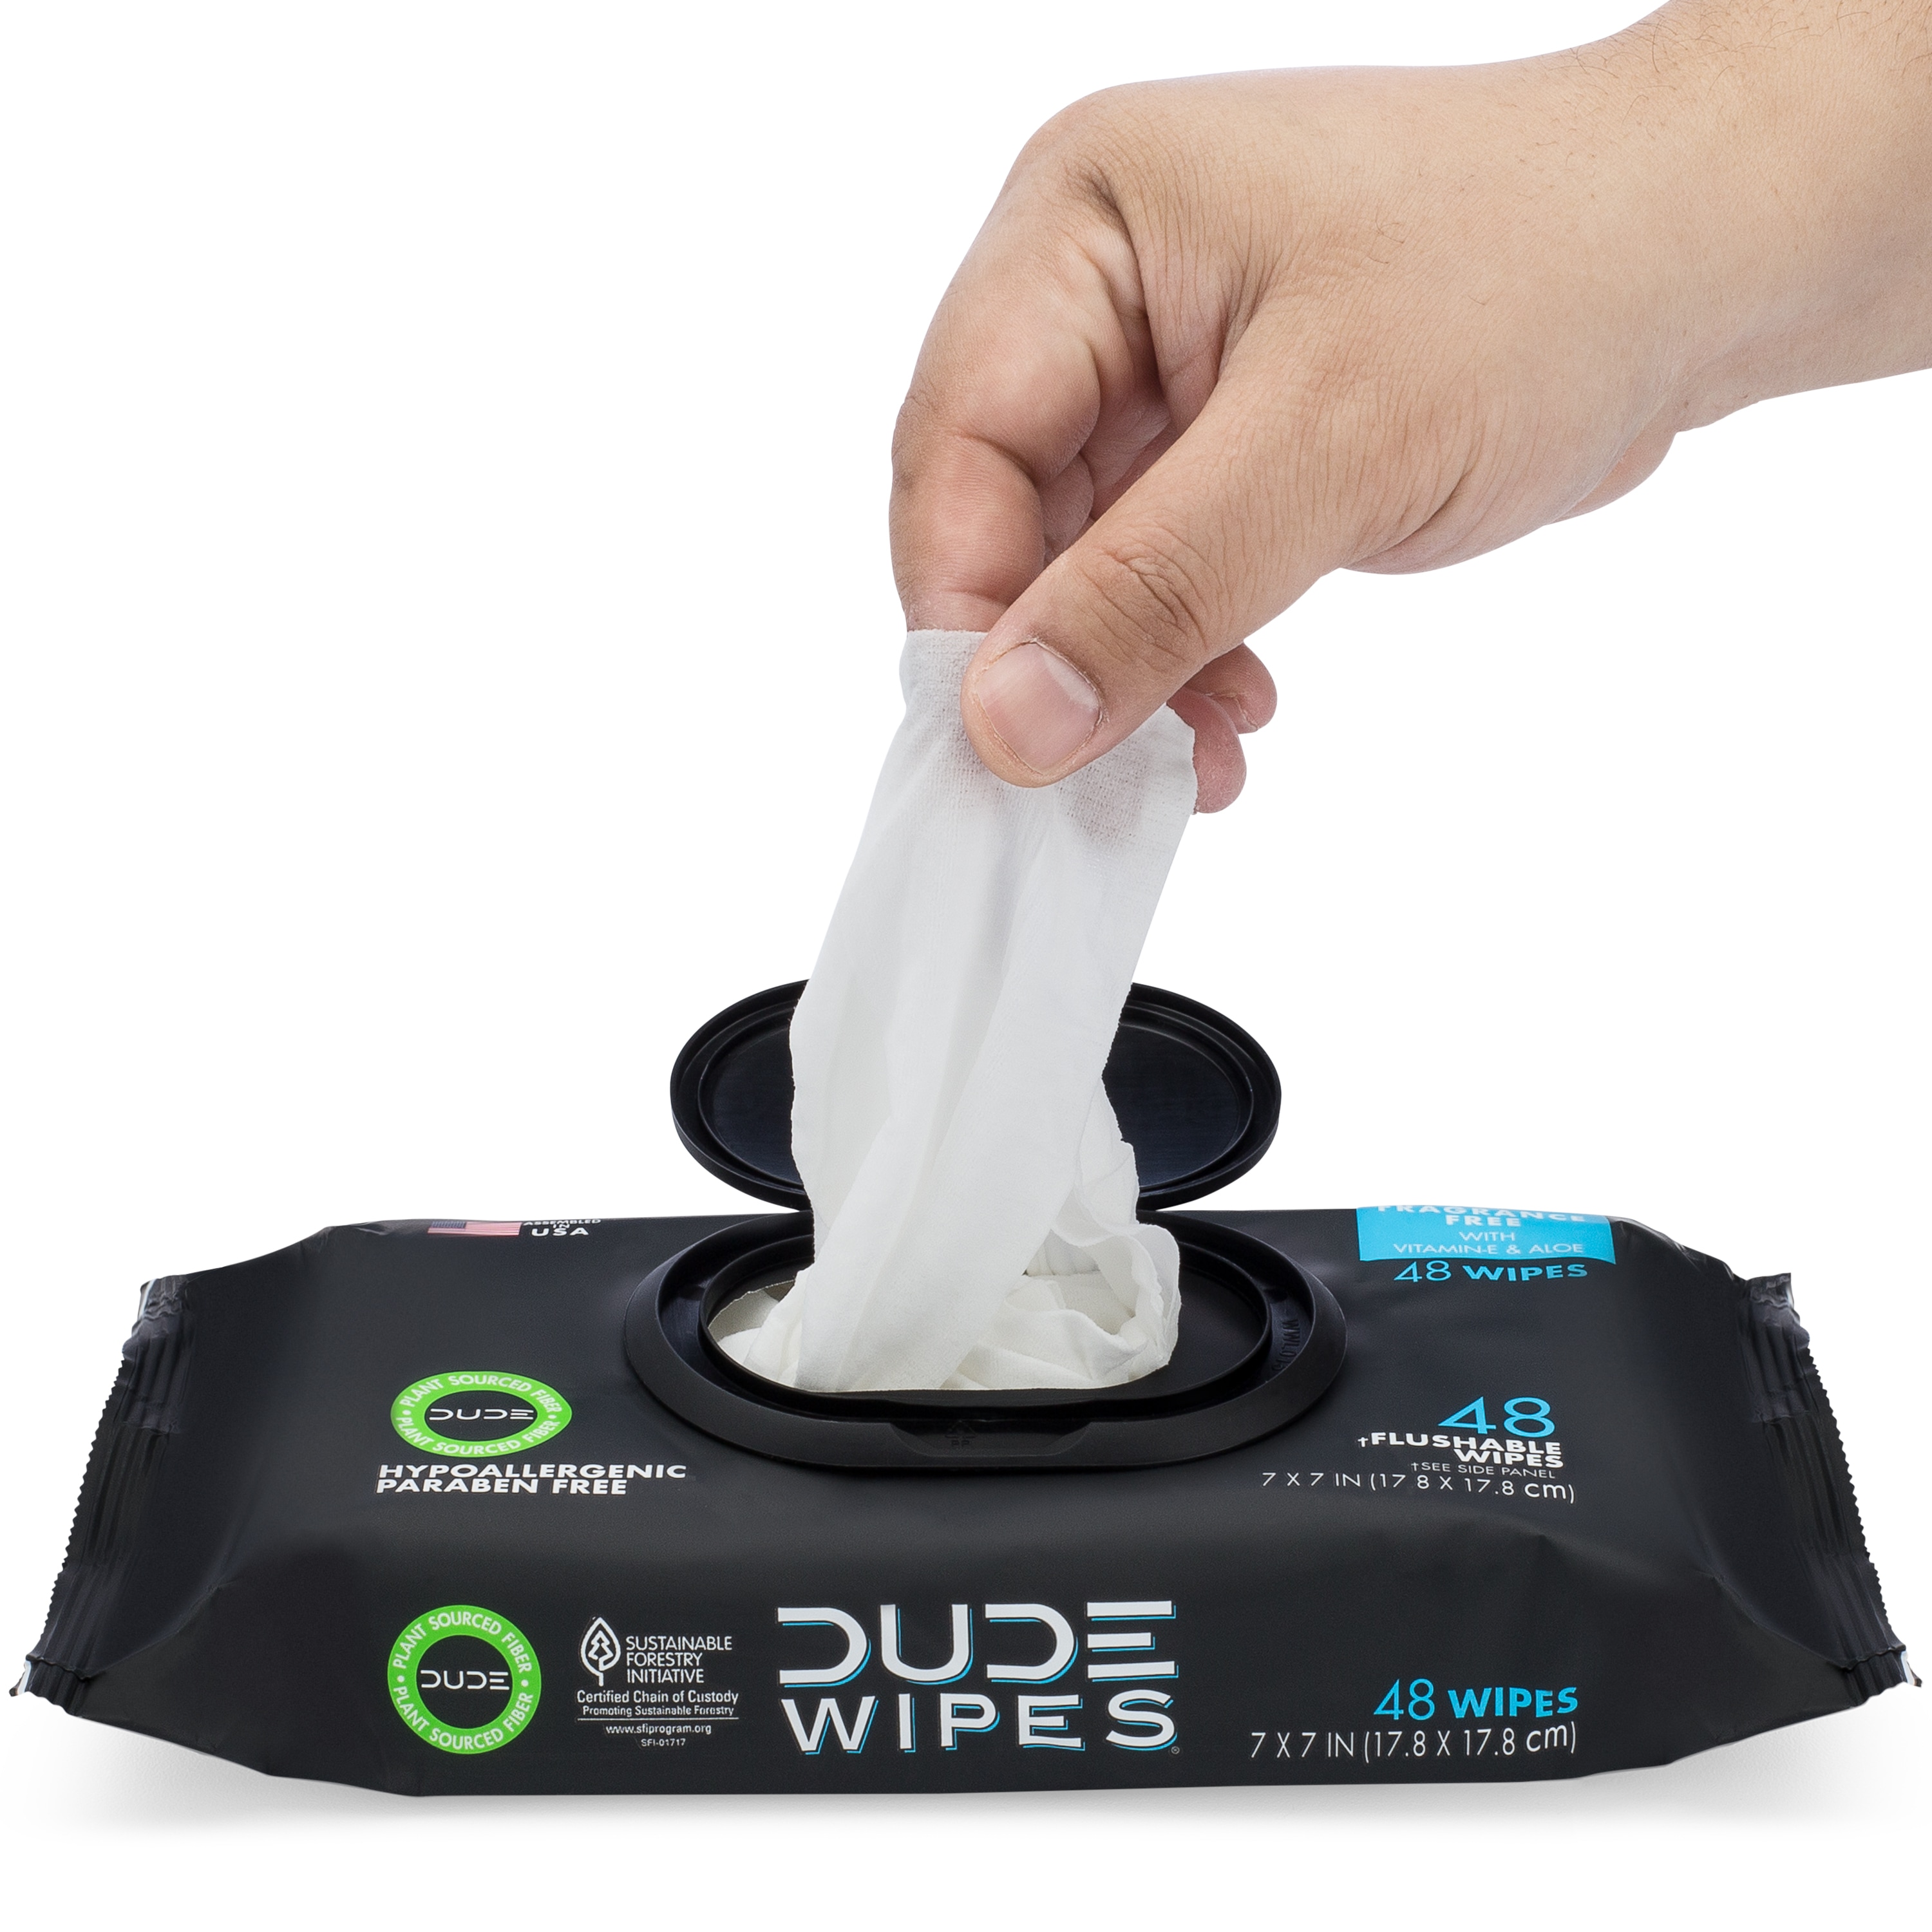  DUDE Wipes - On-The-Go Flushable Wipes - 30 Wipes